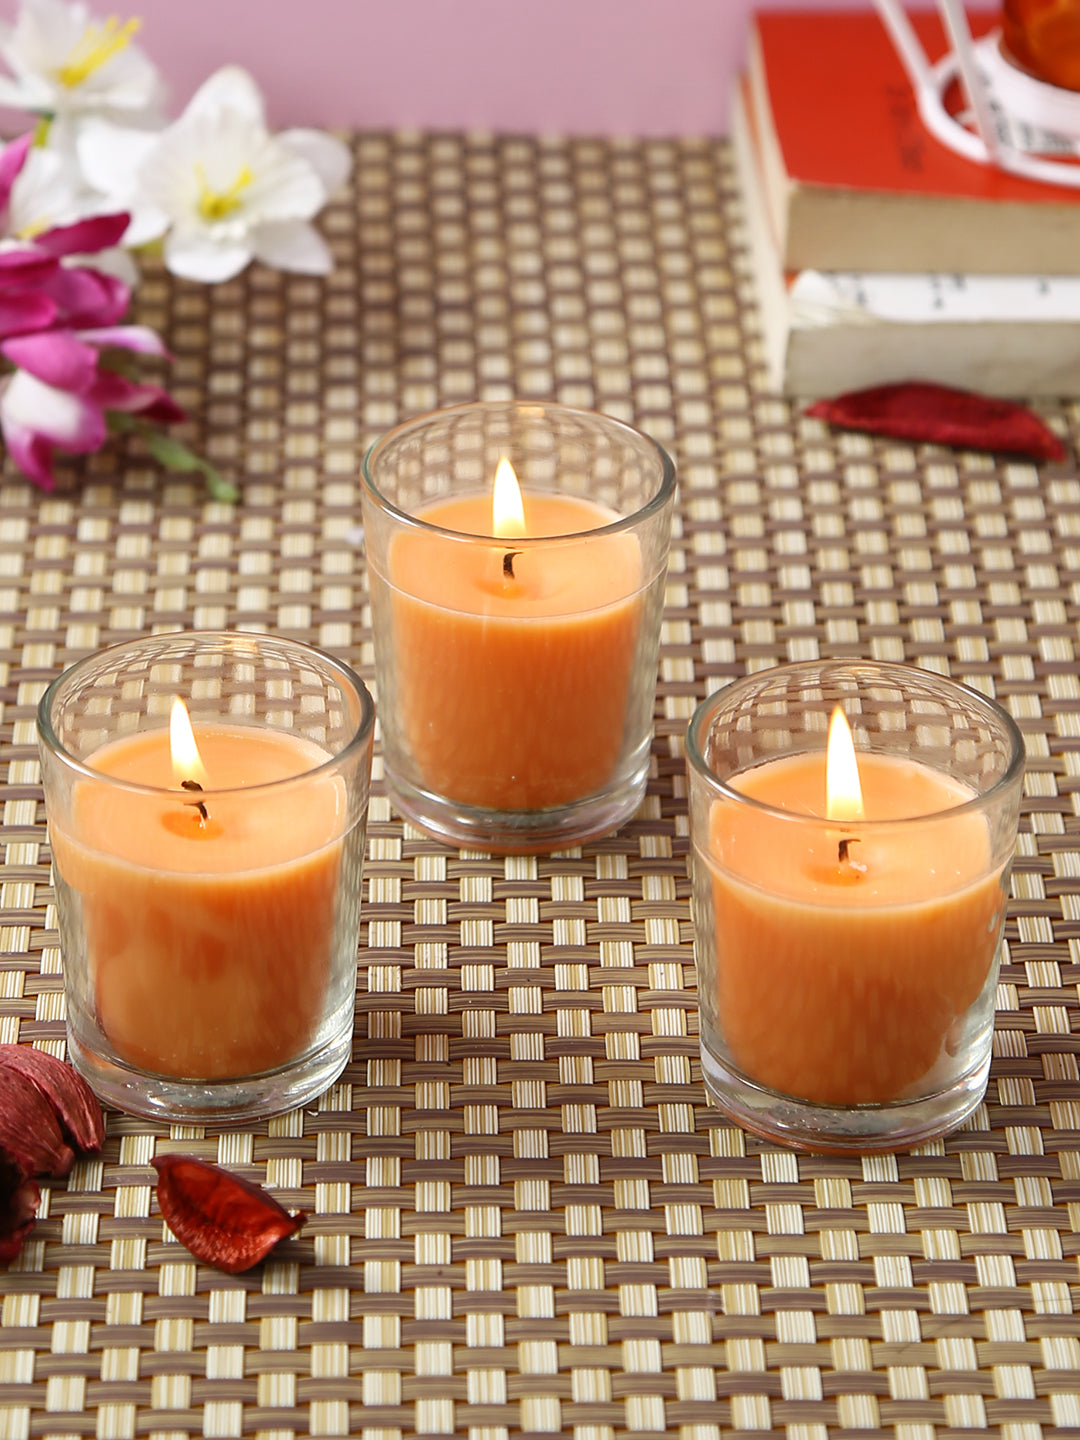 Set of 3 Hosley® Highly Fragranced Tropical Mist Filled Glass Candles. 1.6 Oz wax each